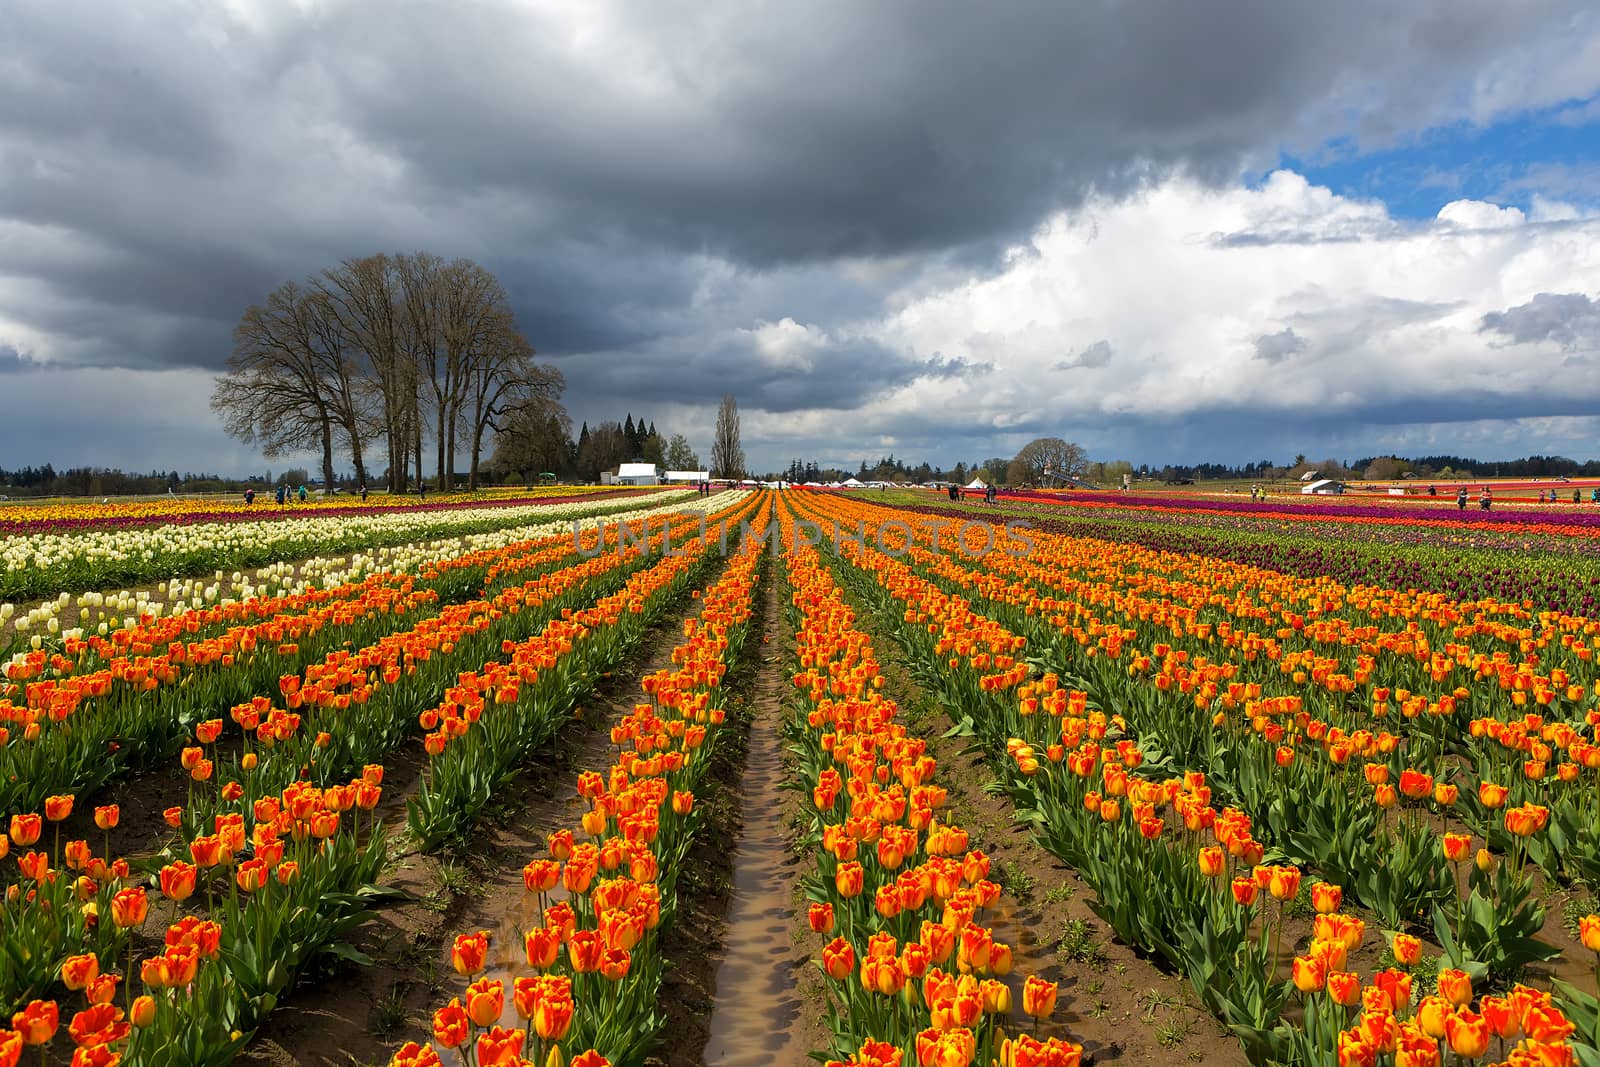 Rows of colorful tulips at Wooden Shoe Tulip Festival in Woodburn Oregon on a cloudy day